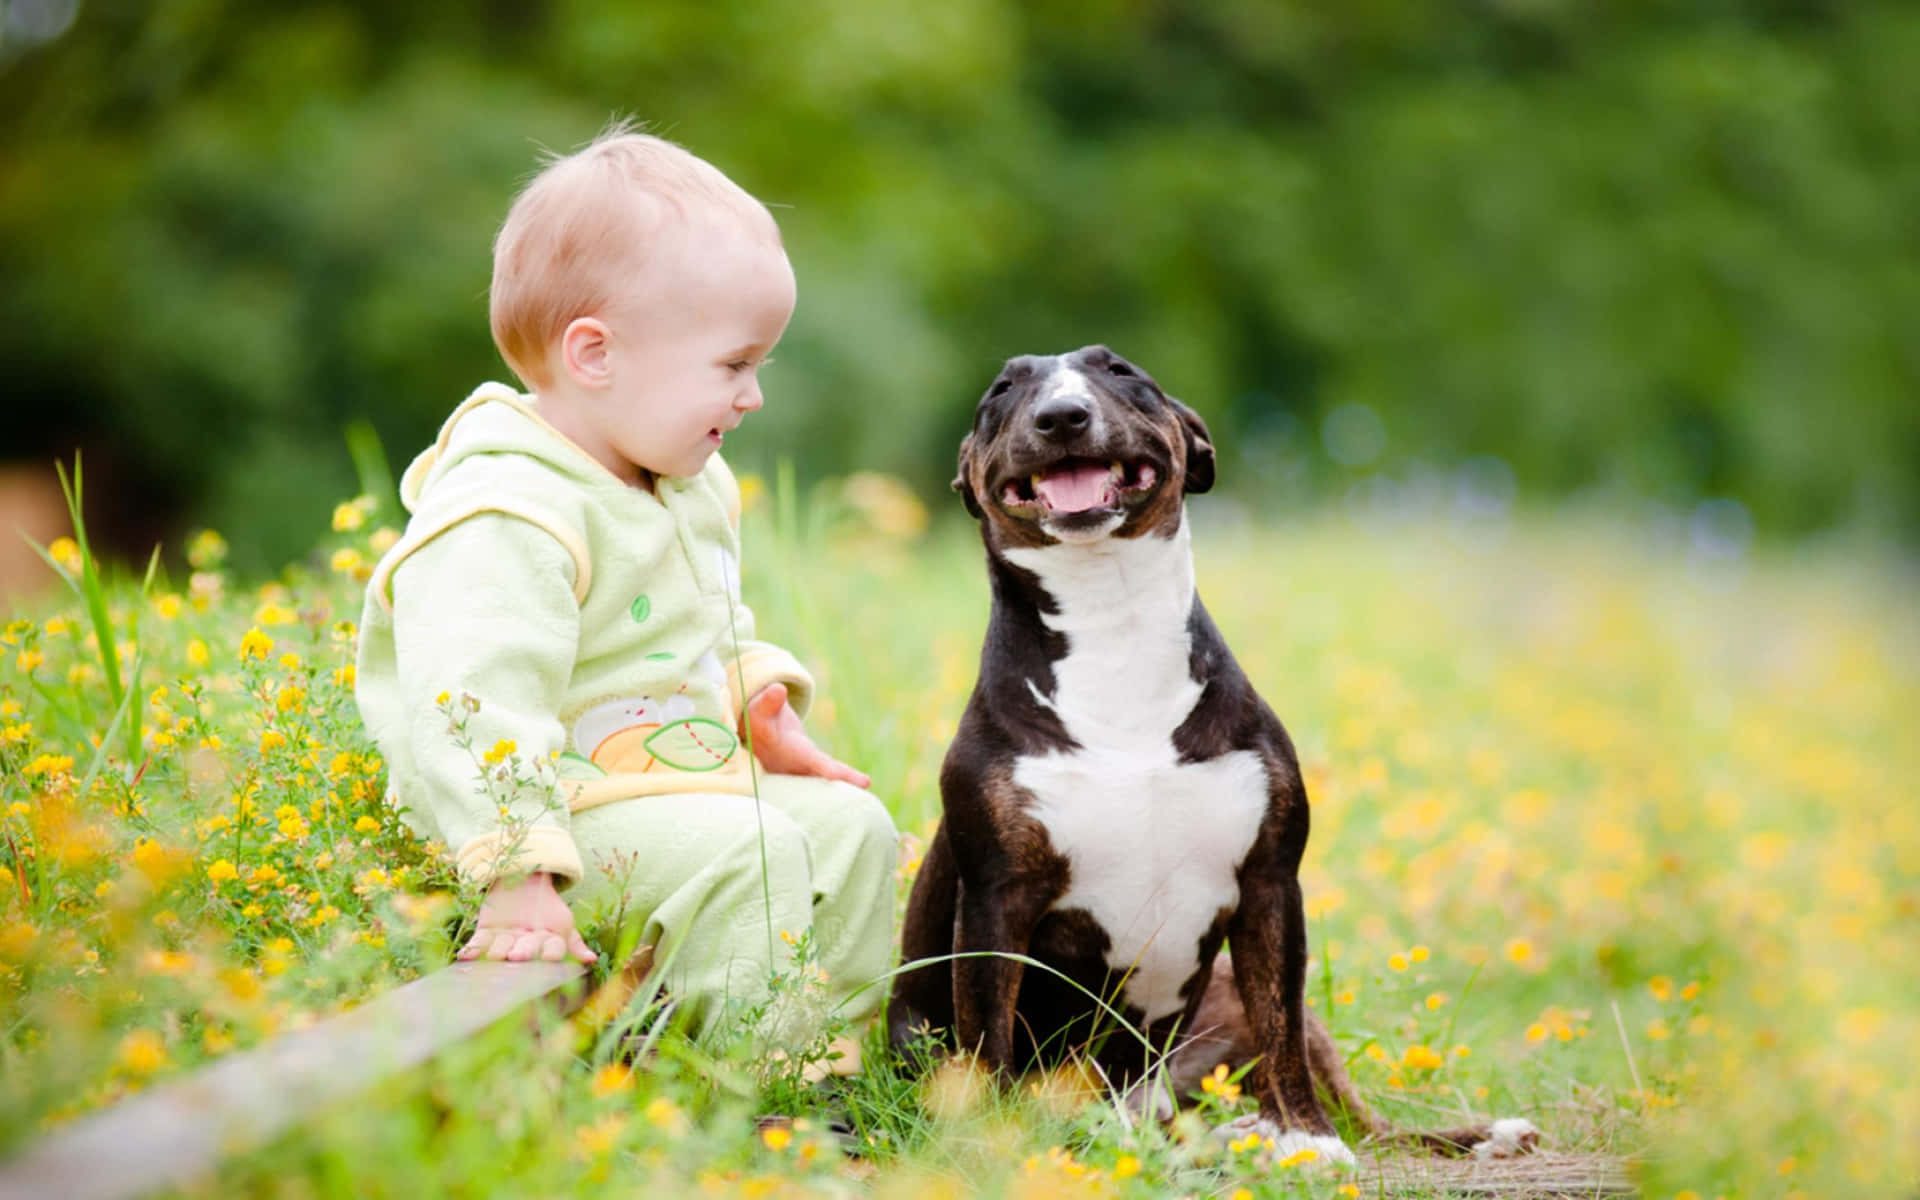 A Baby Sitting Next To A Dog In A Field Wallpaper